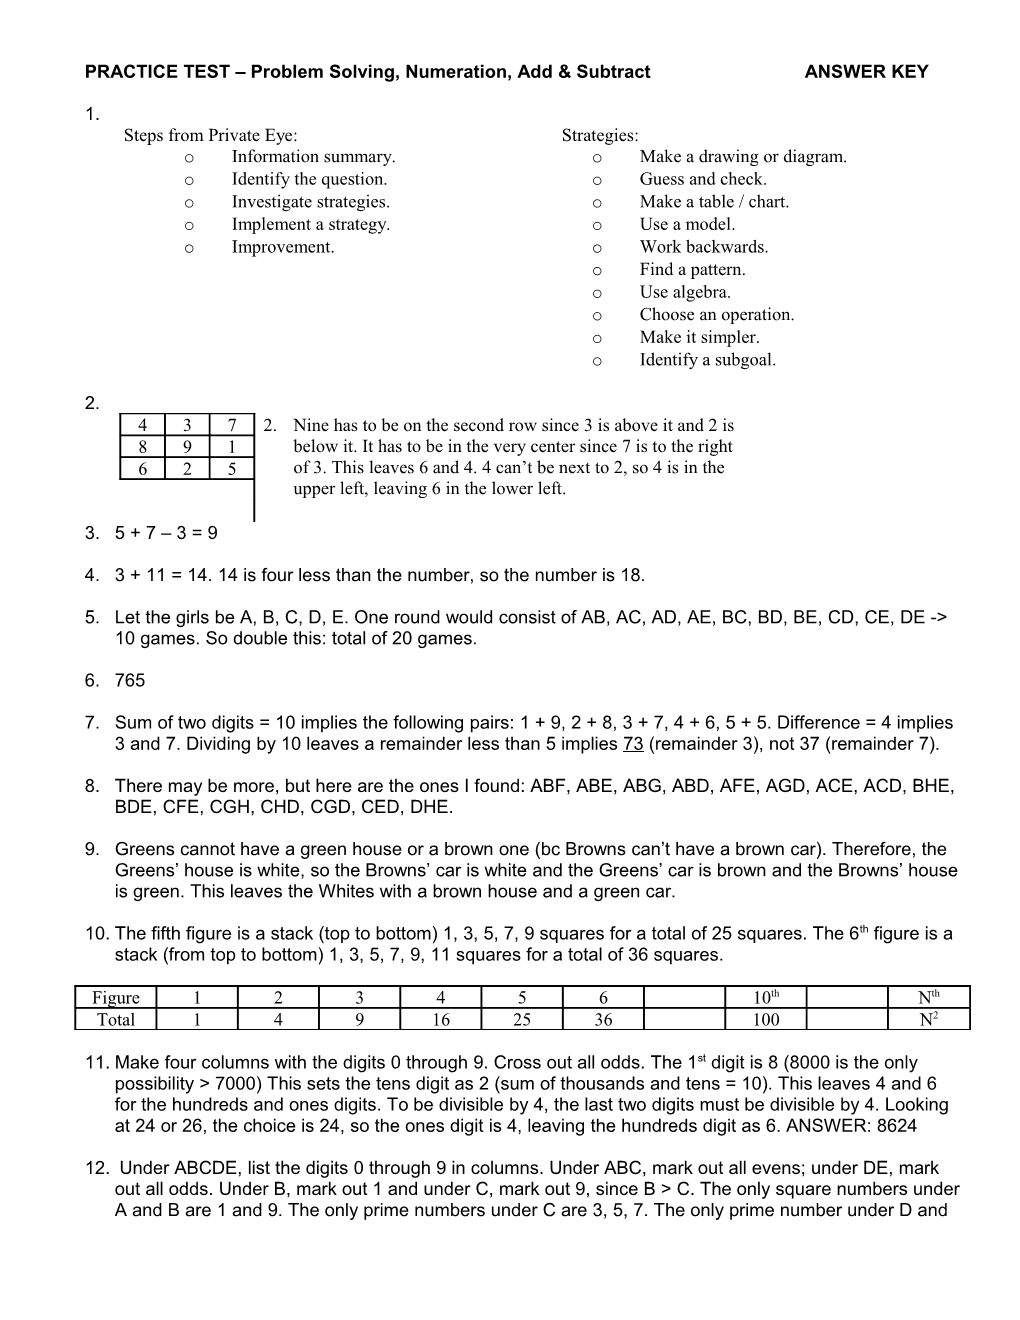 PRACTICE TEST Problem Solving, Numeration, Add & Subtract